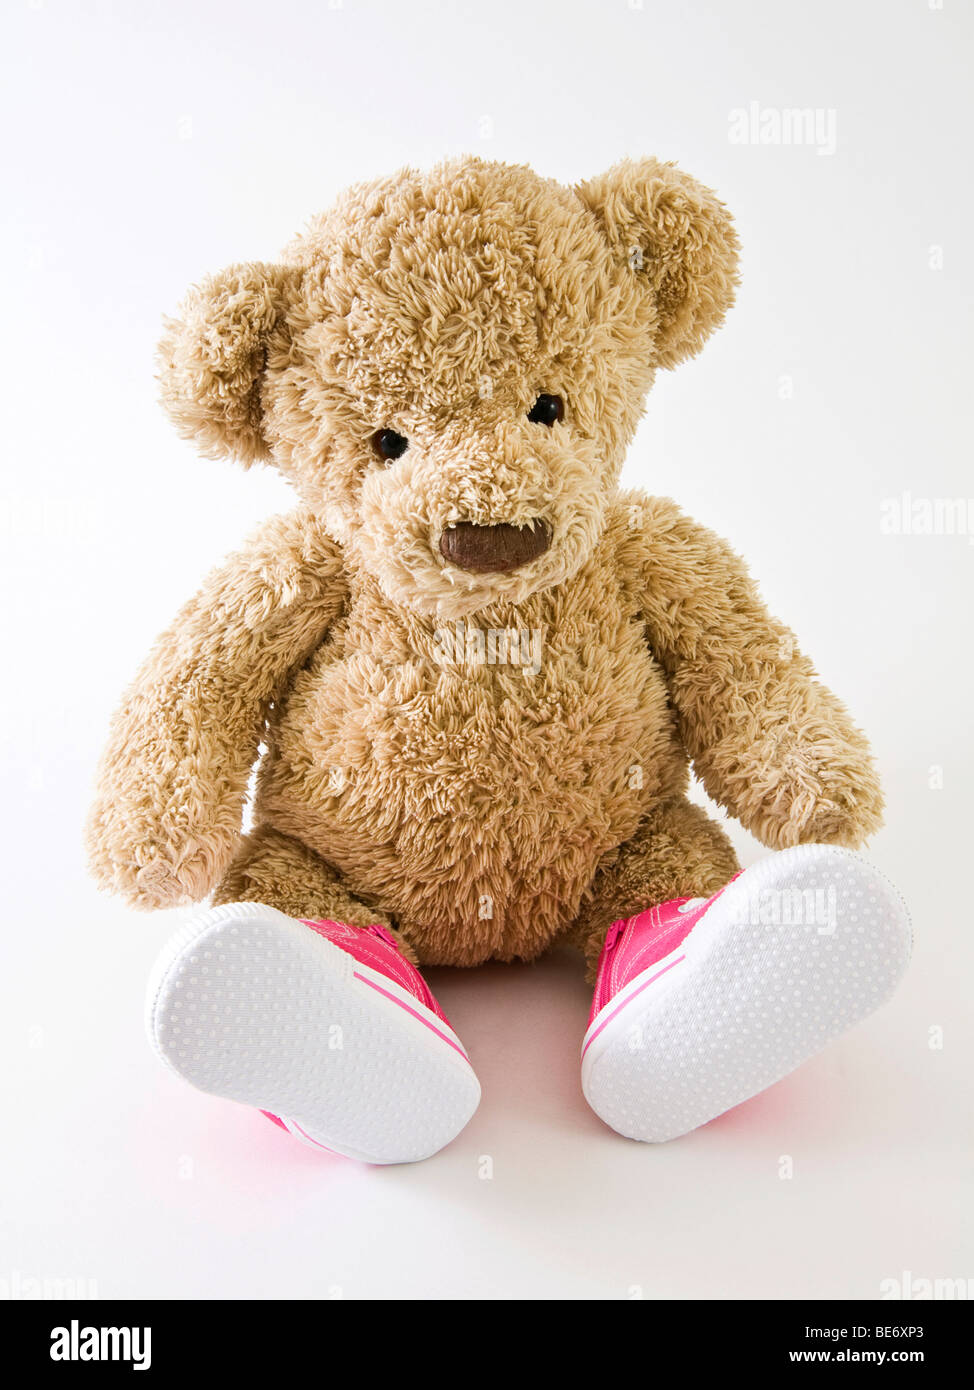 Teddy bear with baby shoes Stock Photo 